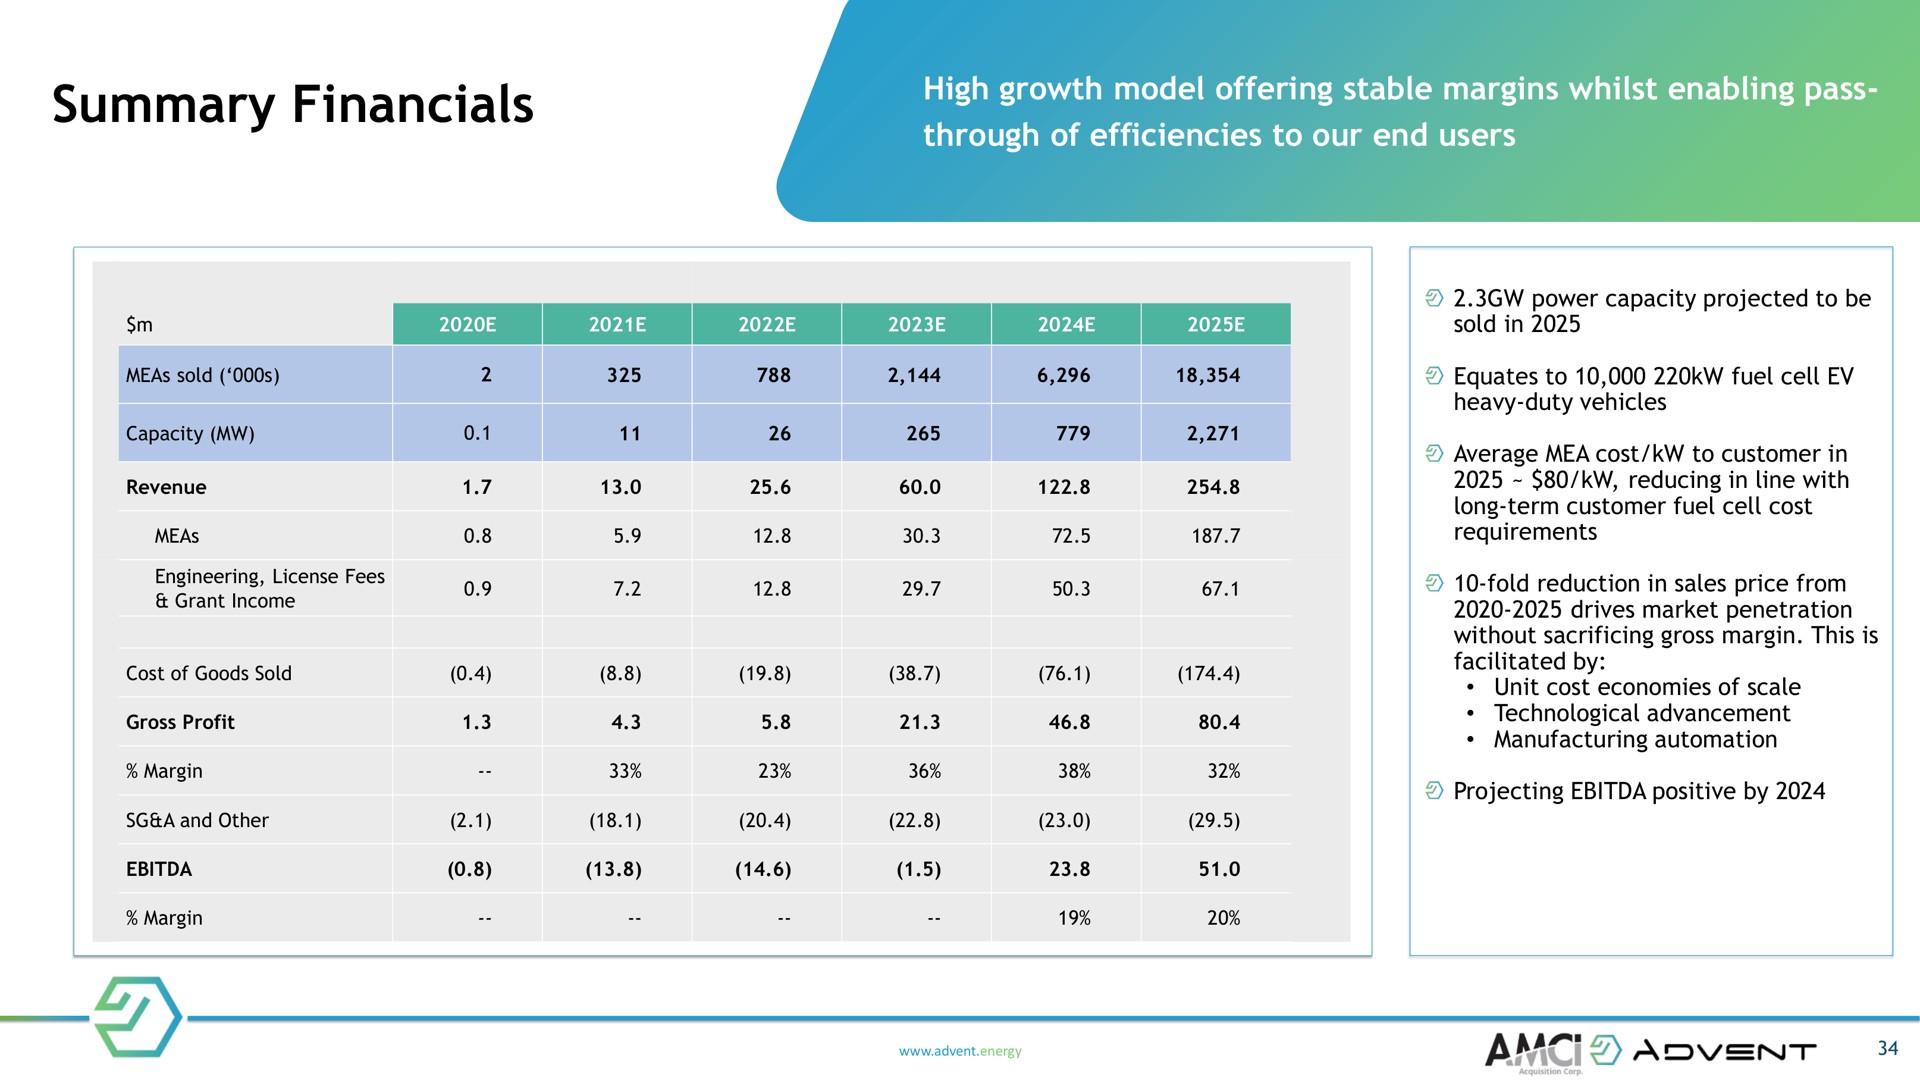 summary high growth model offering stable margins whilst enabling pass through of efficiencies to our end users sold capacity revenue engineering license fees grant income cost of goods sold gross profit margin a and other margin power capacity projected to be sold in equates to fuel cell heavy duty vehicles average cost to customer in reducing in line with long term customer fuel cell cost requirements fold reduction in sales price from drives market penetration without sacrificing gross margin this is facilitated by unit cost economies of scale technological advancement manufacturing projecting positive by energy am a | Advent